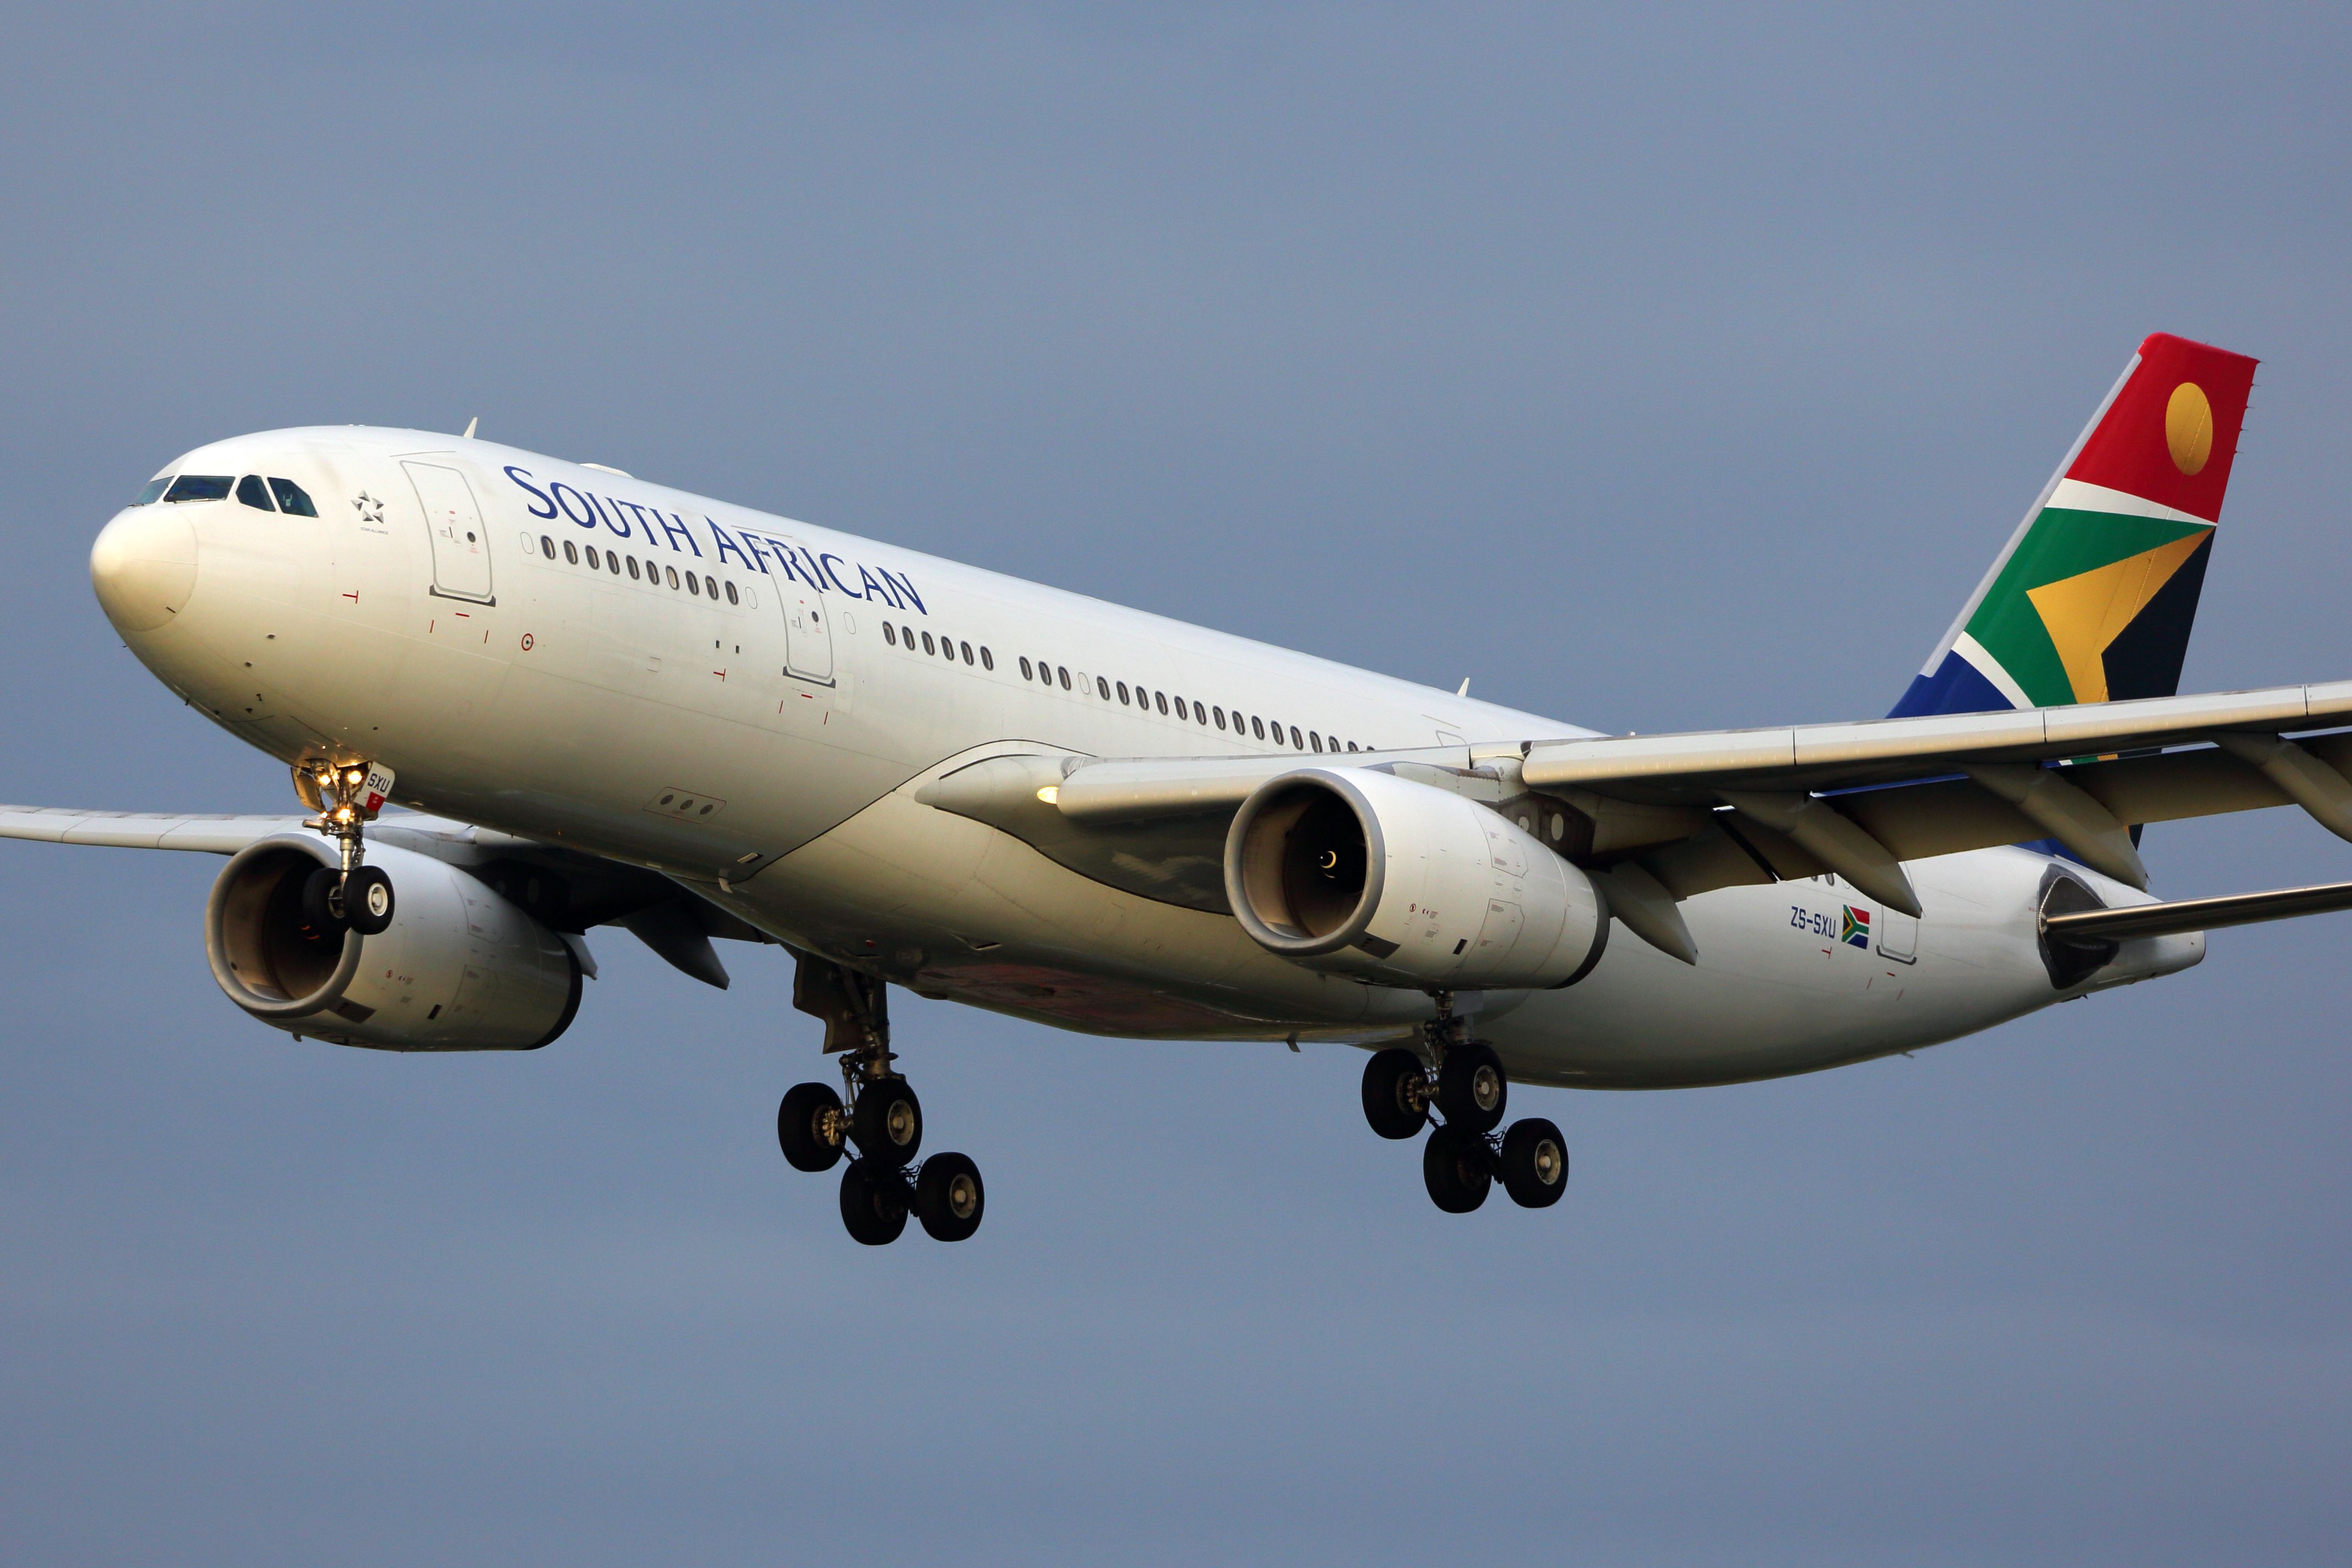 A South African Airways Airbus A330-300 landing at Heathrow 